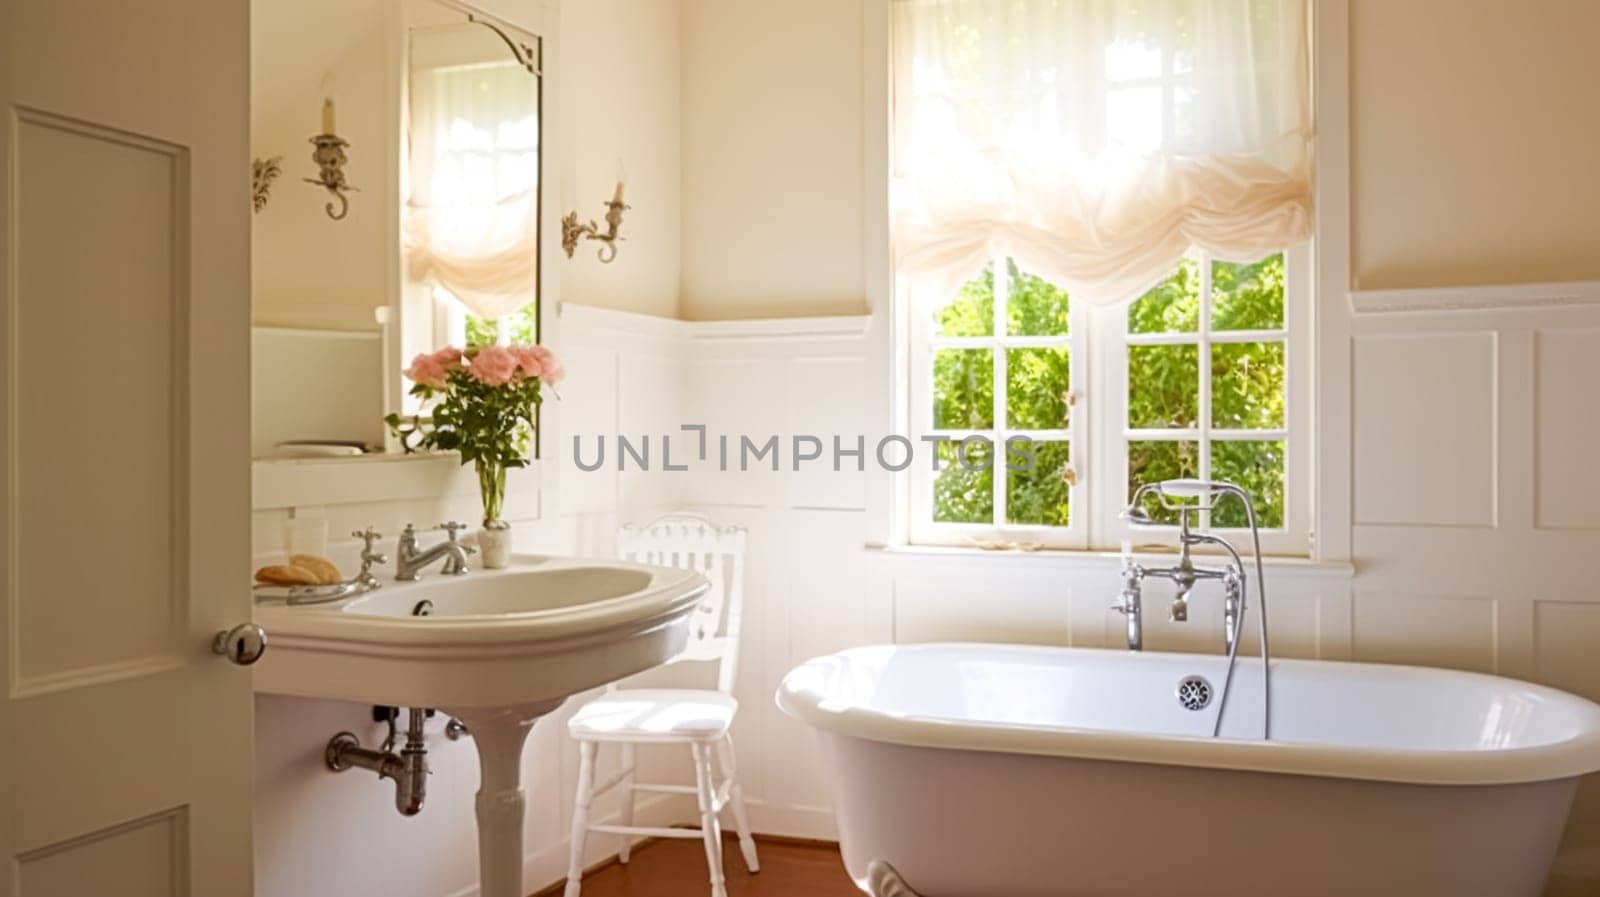 White manor bathroom decor, interior design and home decor, bathtub and bathroom furniture, English country house and cottage style inspiration